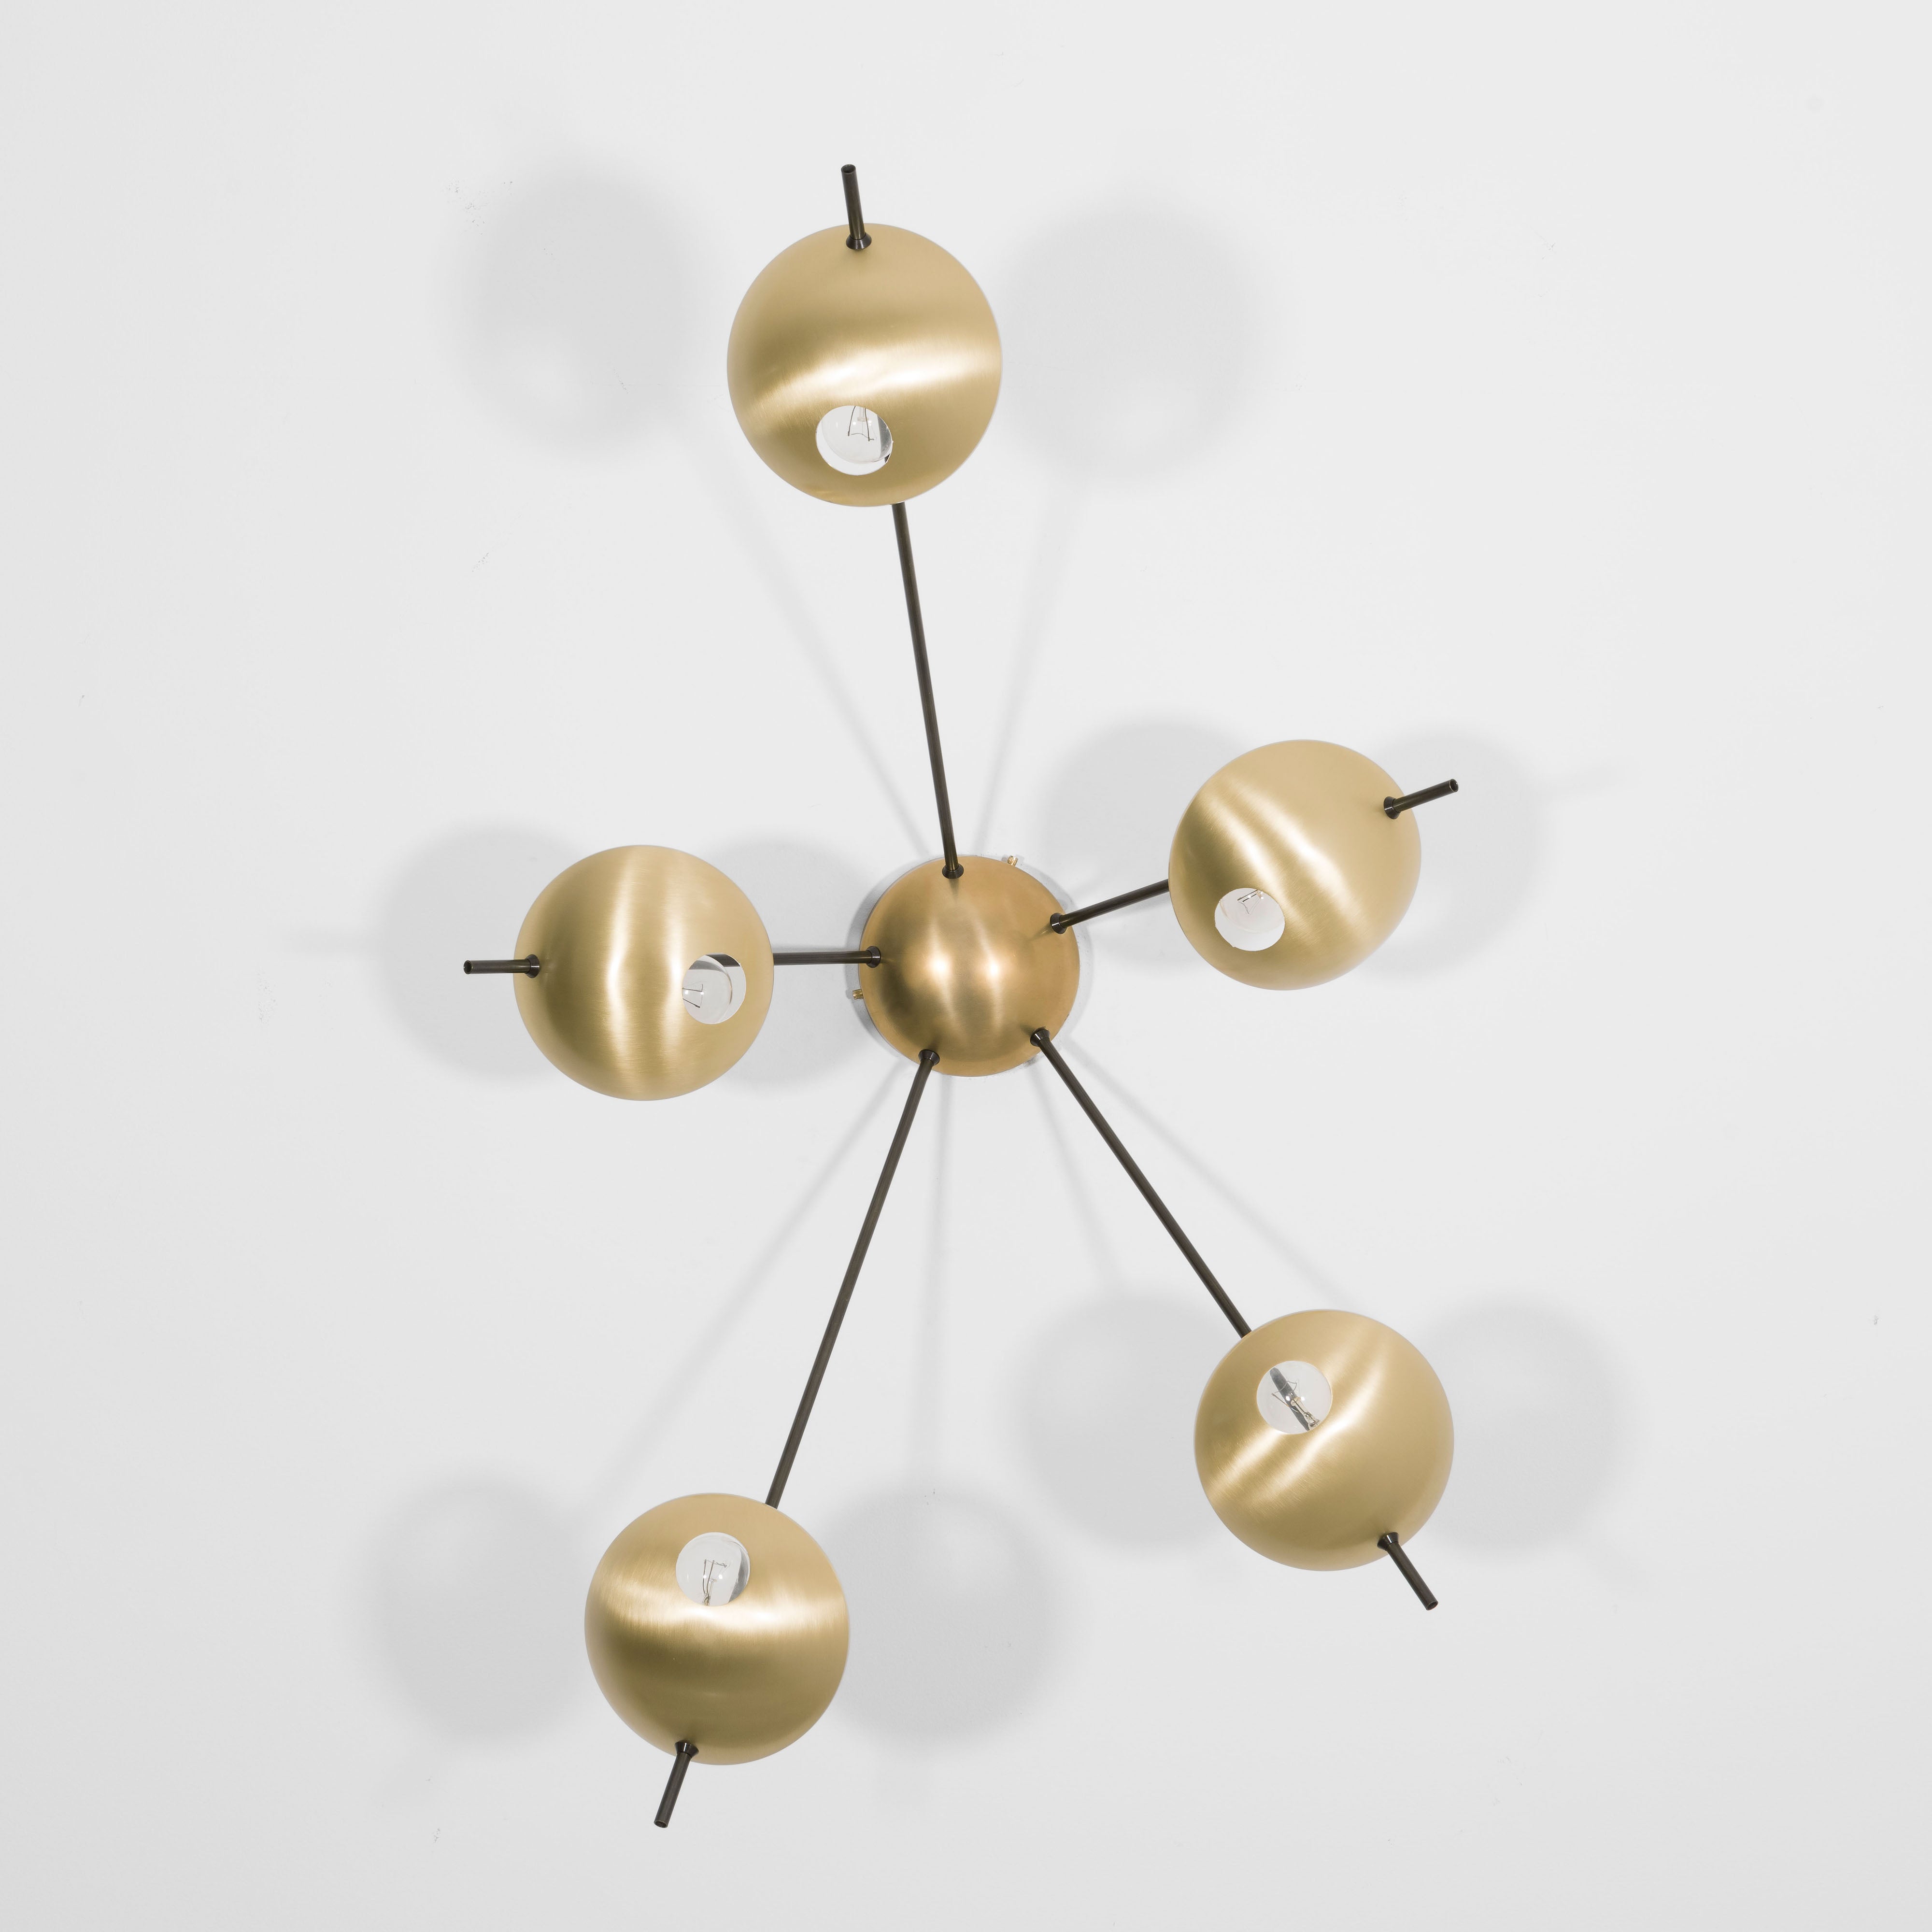 Quinque II, with its elements and its shapes simplicity and with its light and shadow effects, represents a tribute to sundials, ancient solar clocks. From a brass core, 5 thin arms branch off, lightly supporting 5 painted brass plates. Quinque II becomes a point of light and color in any home interiors, an element of creative and colored decoration.